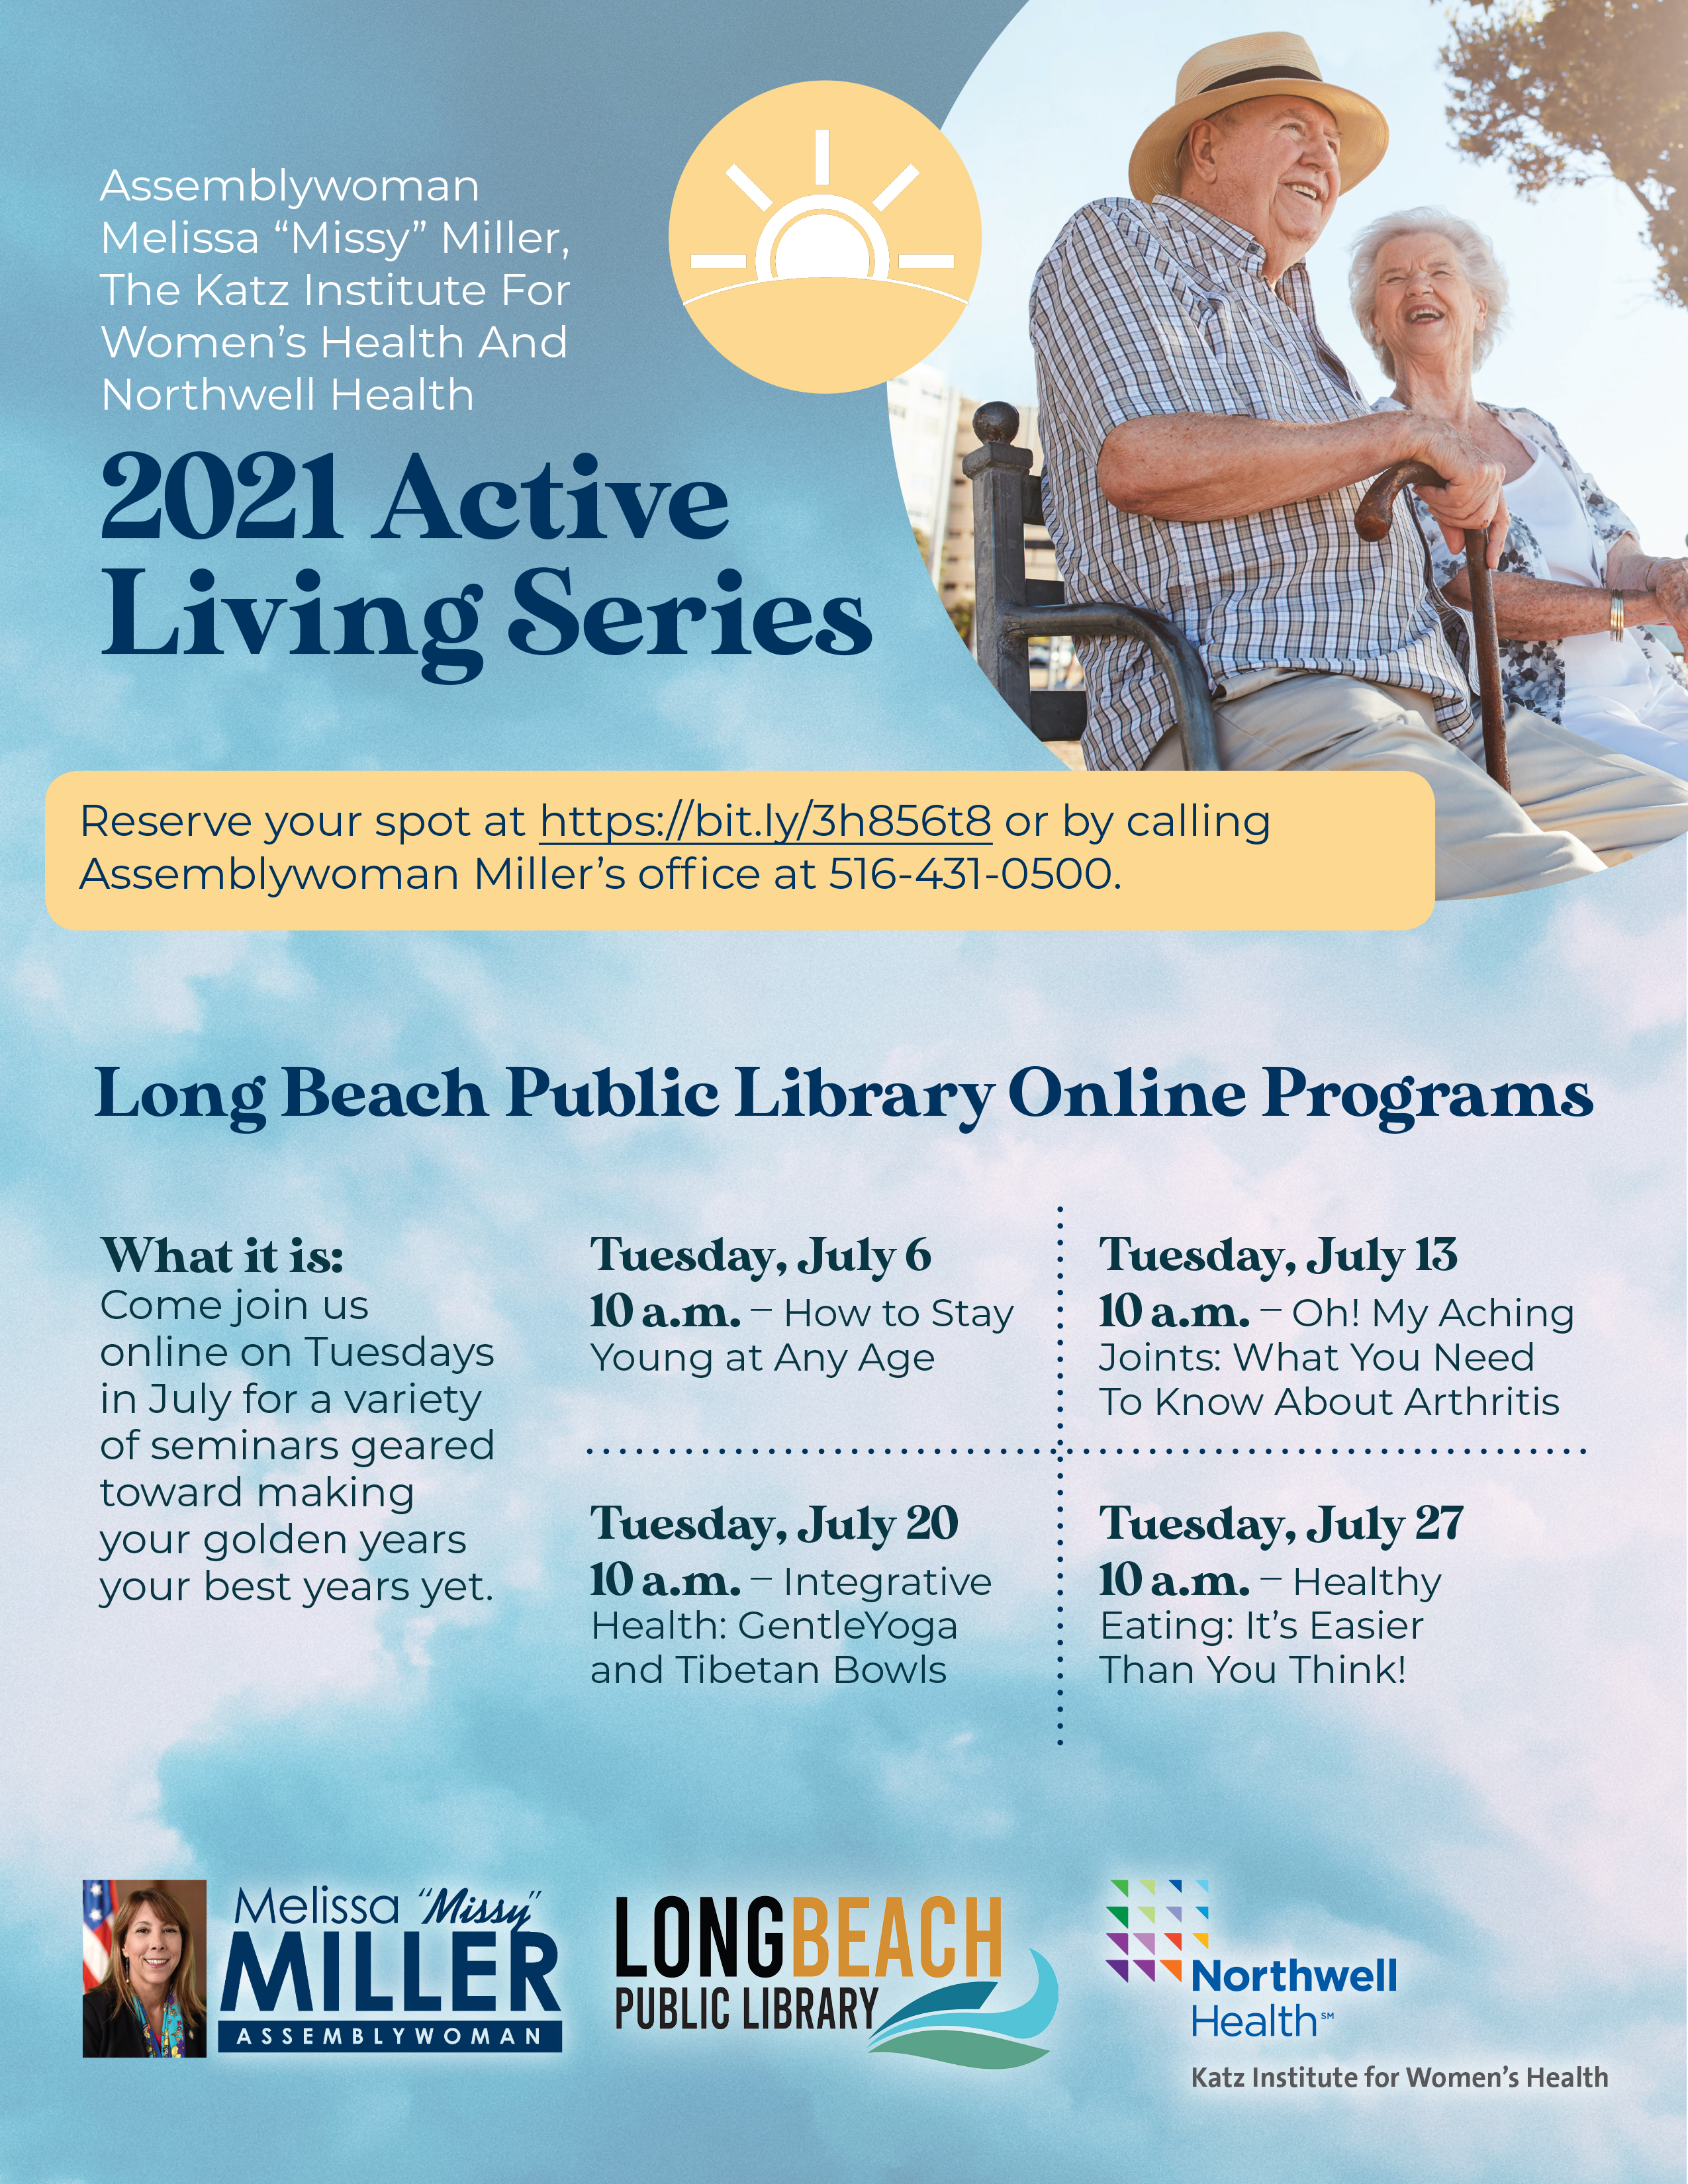 2021 Active Living Series with Long Beach Library and Assemblywoman Miller